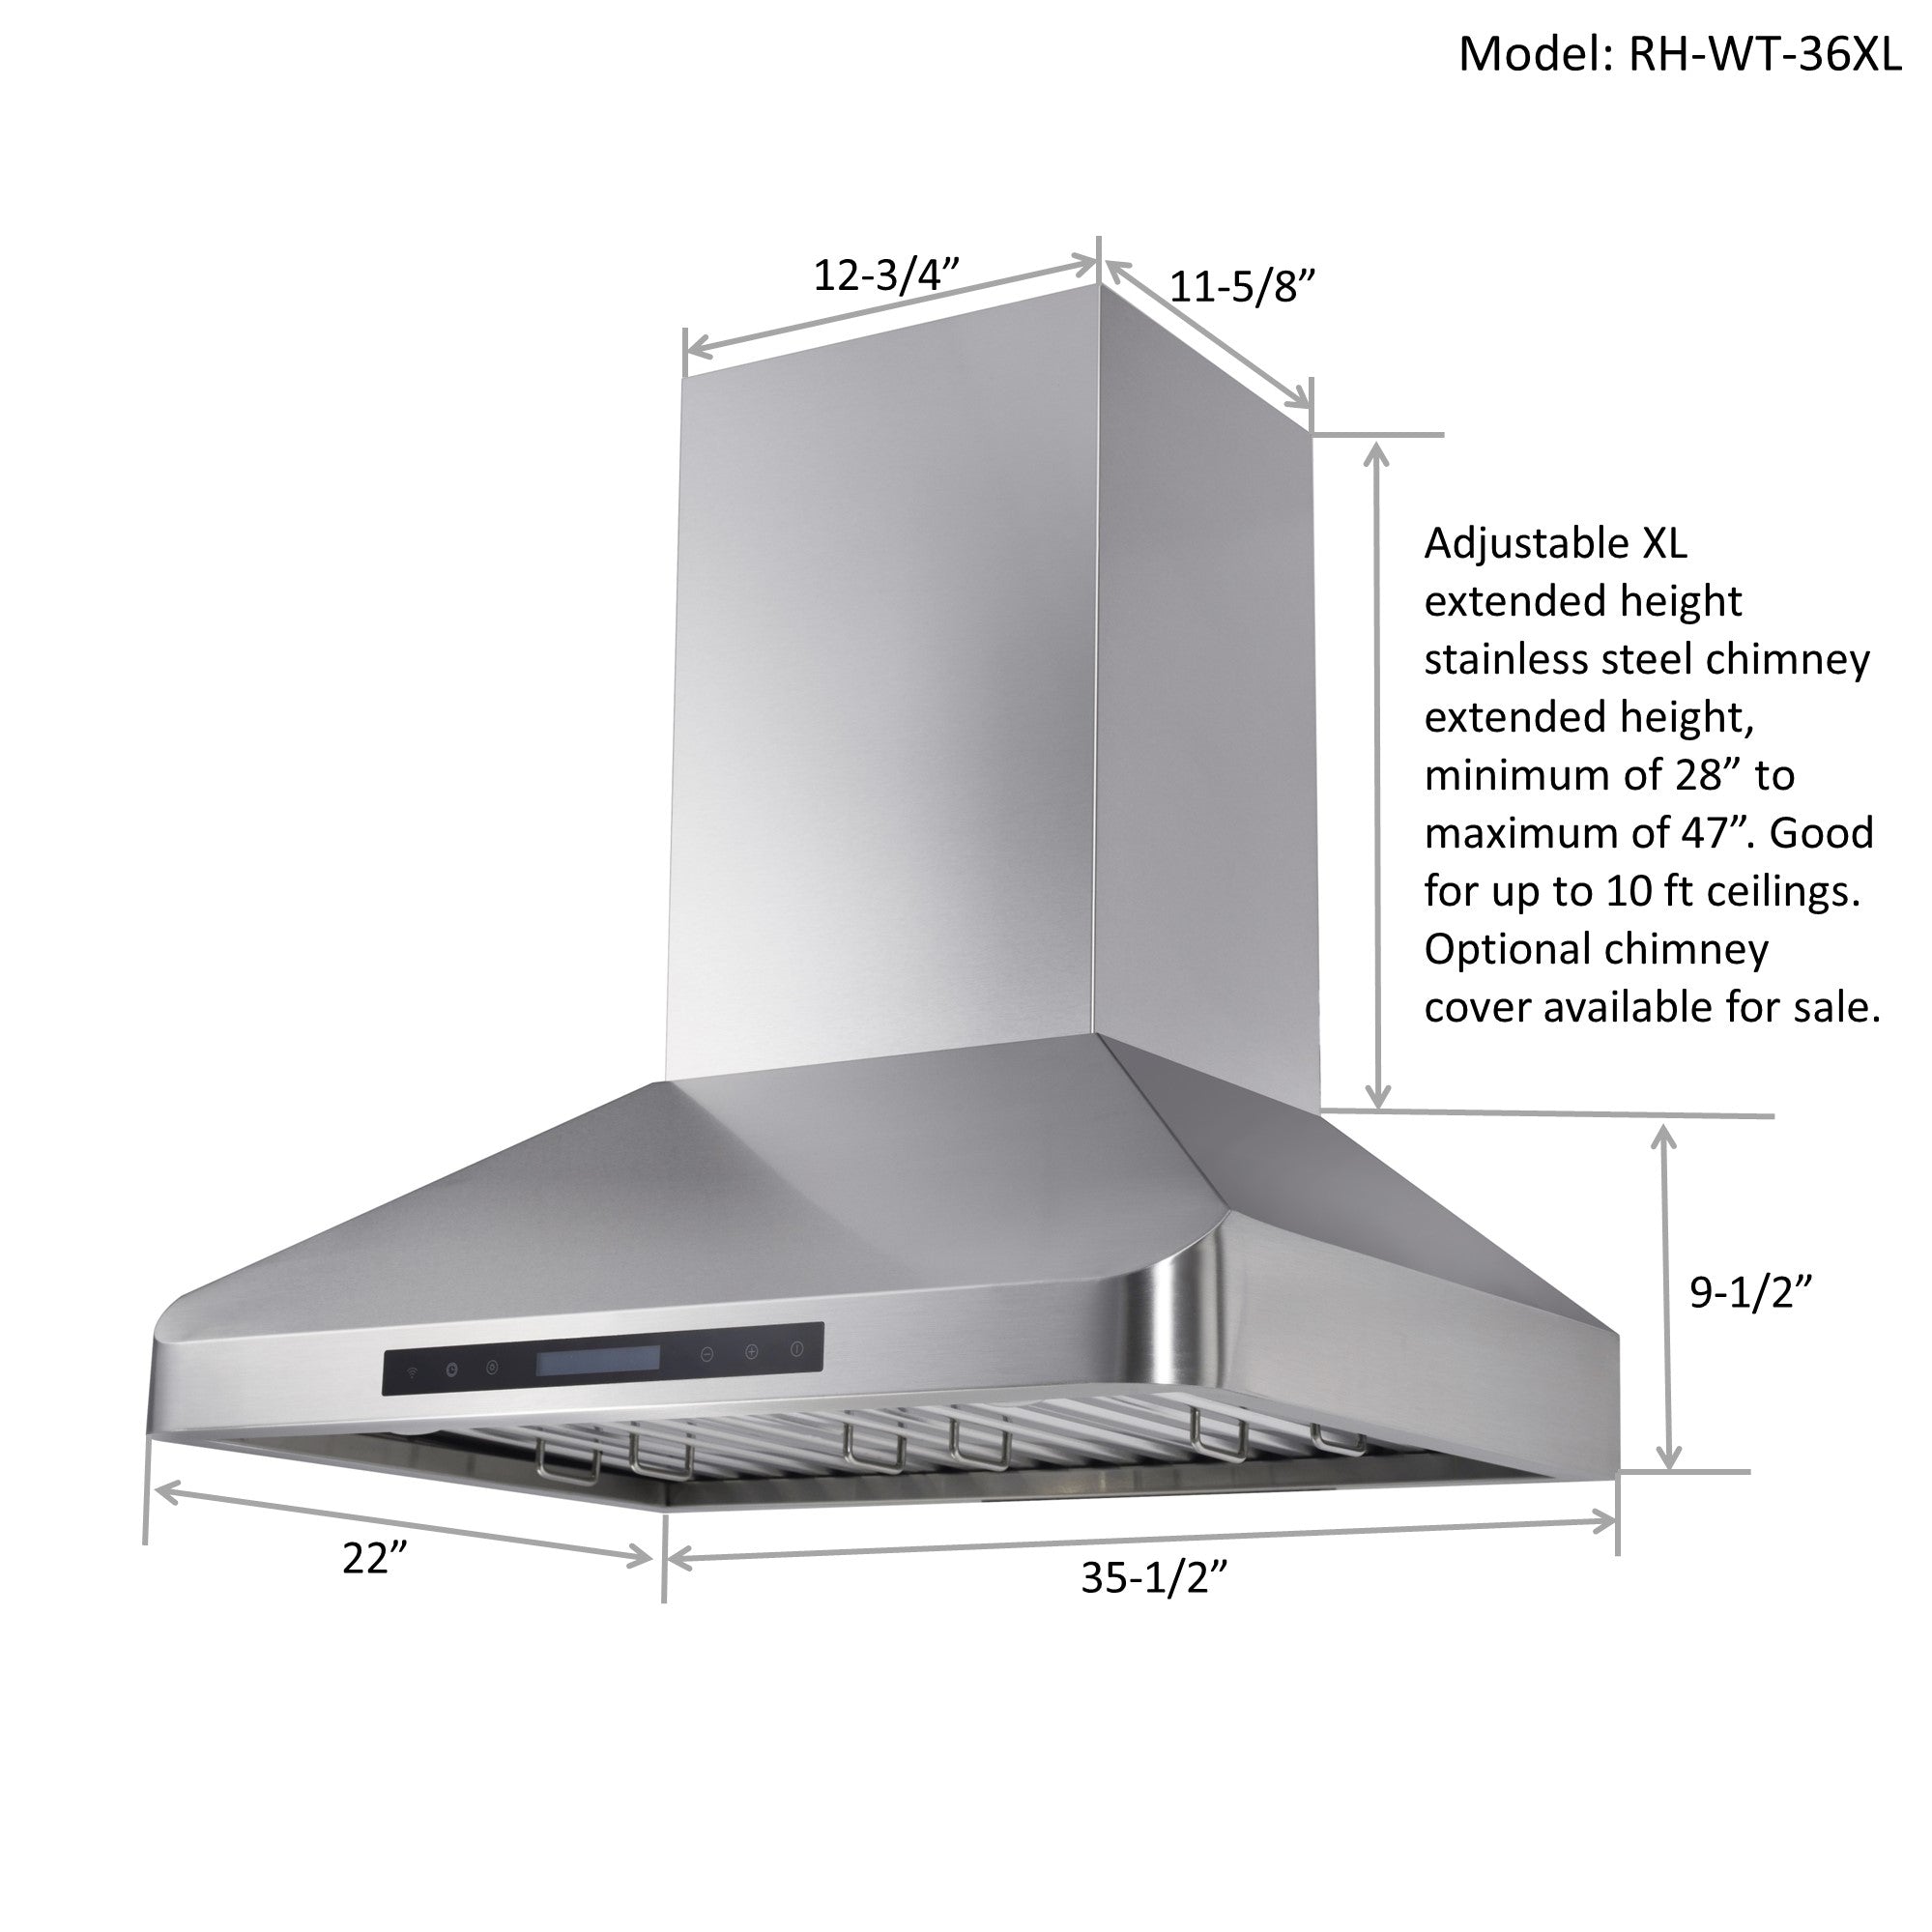 Awoco RH-WT-36XL 56-1/2"H Stainless Steel Range Hood 4 Speeds, 6” Round Top Vent 900CFM 2 LED Lights & Remote Control (36" Wall Mount XL)